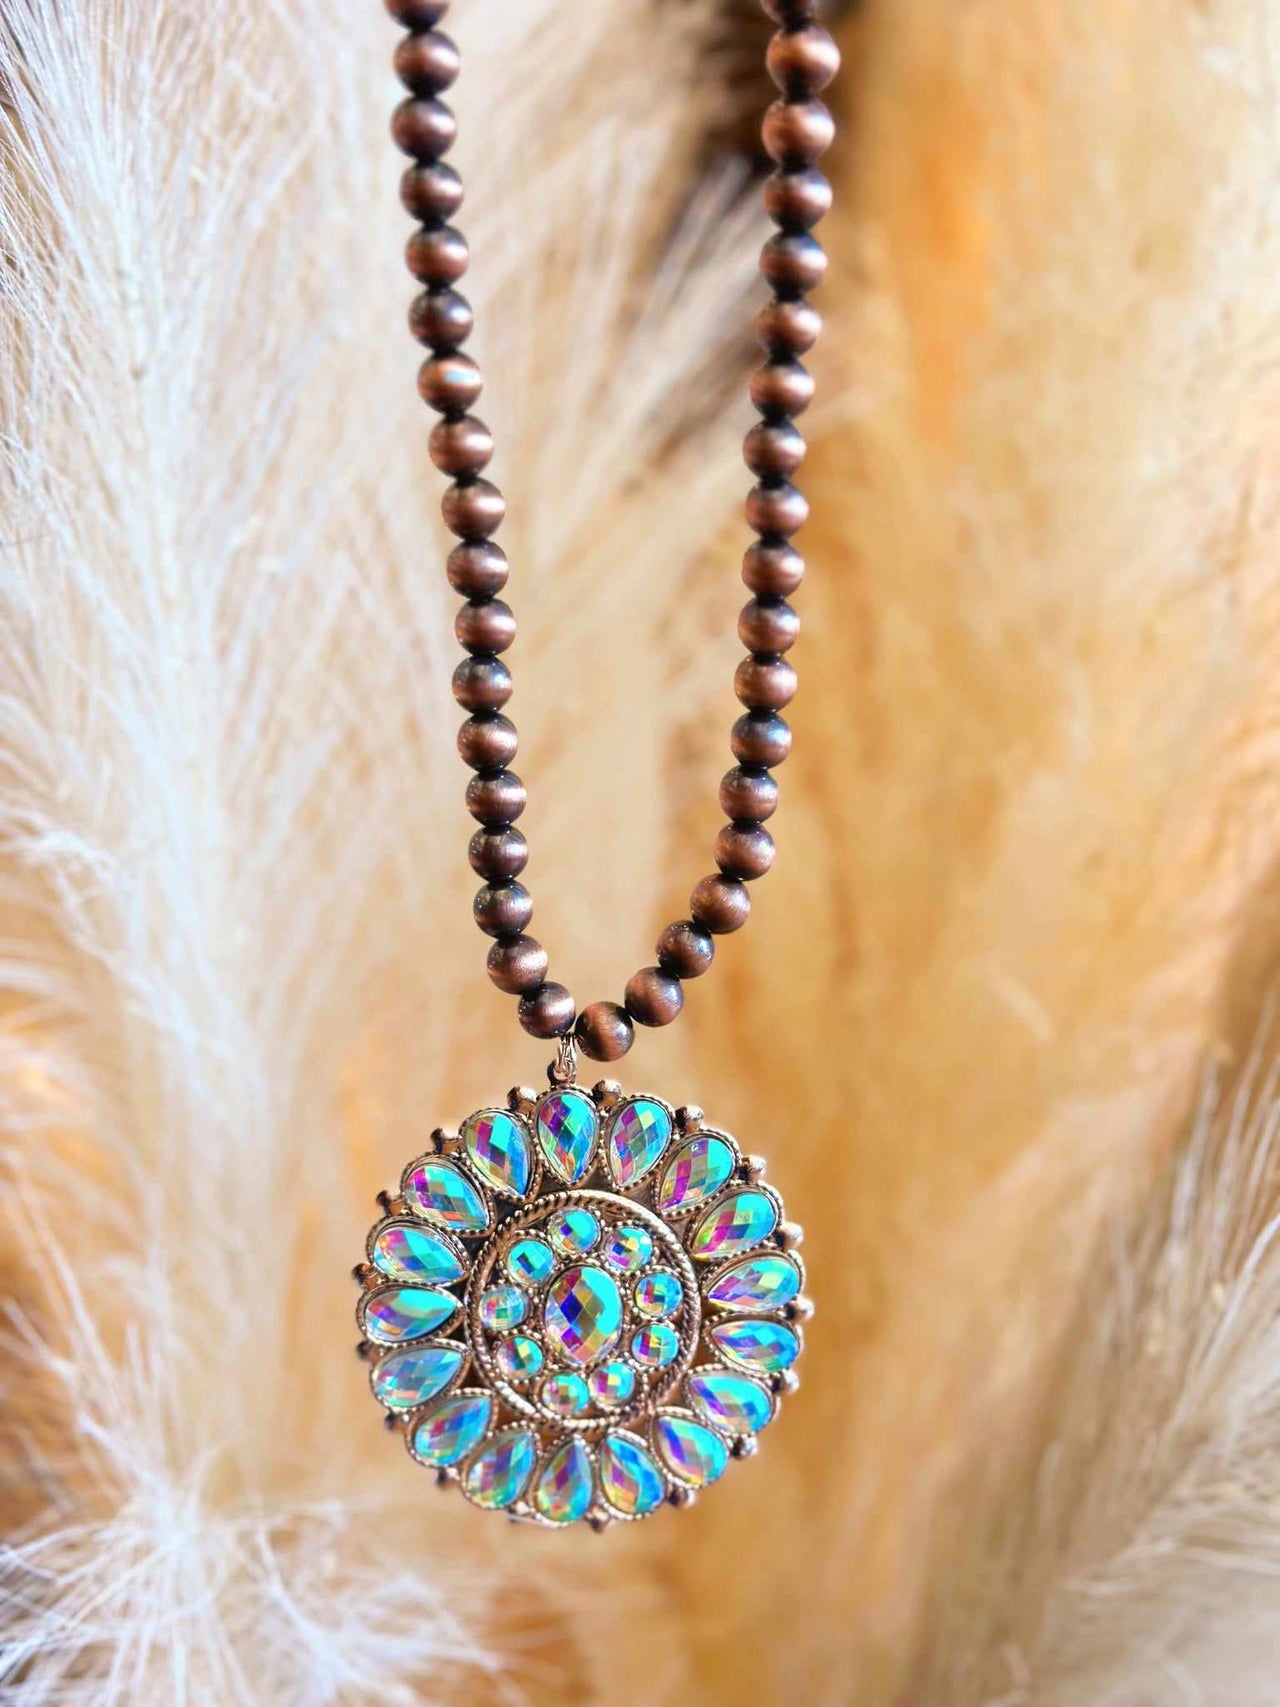 Rose gold beaded necklace with Turquoise crystal concho pendant